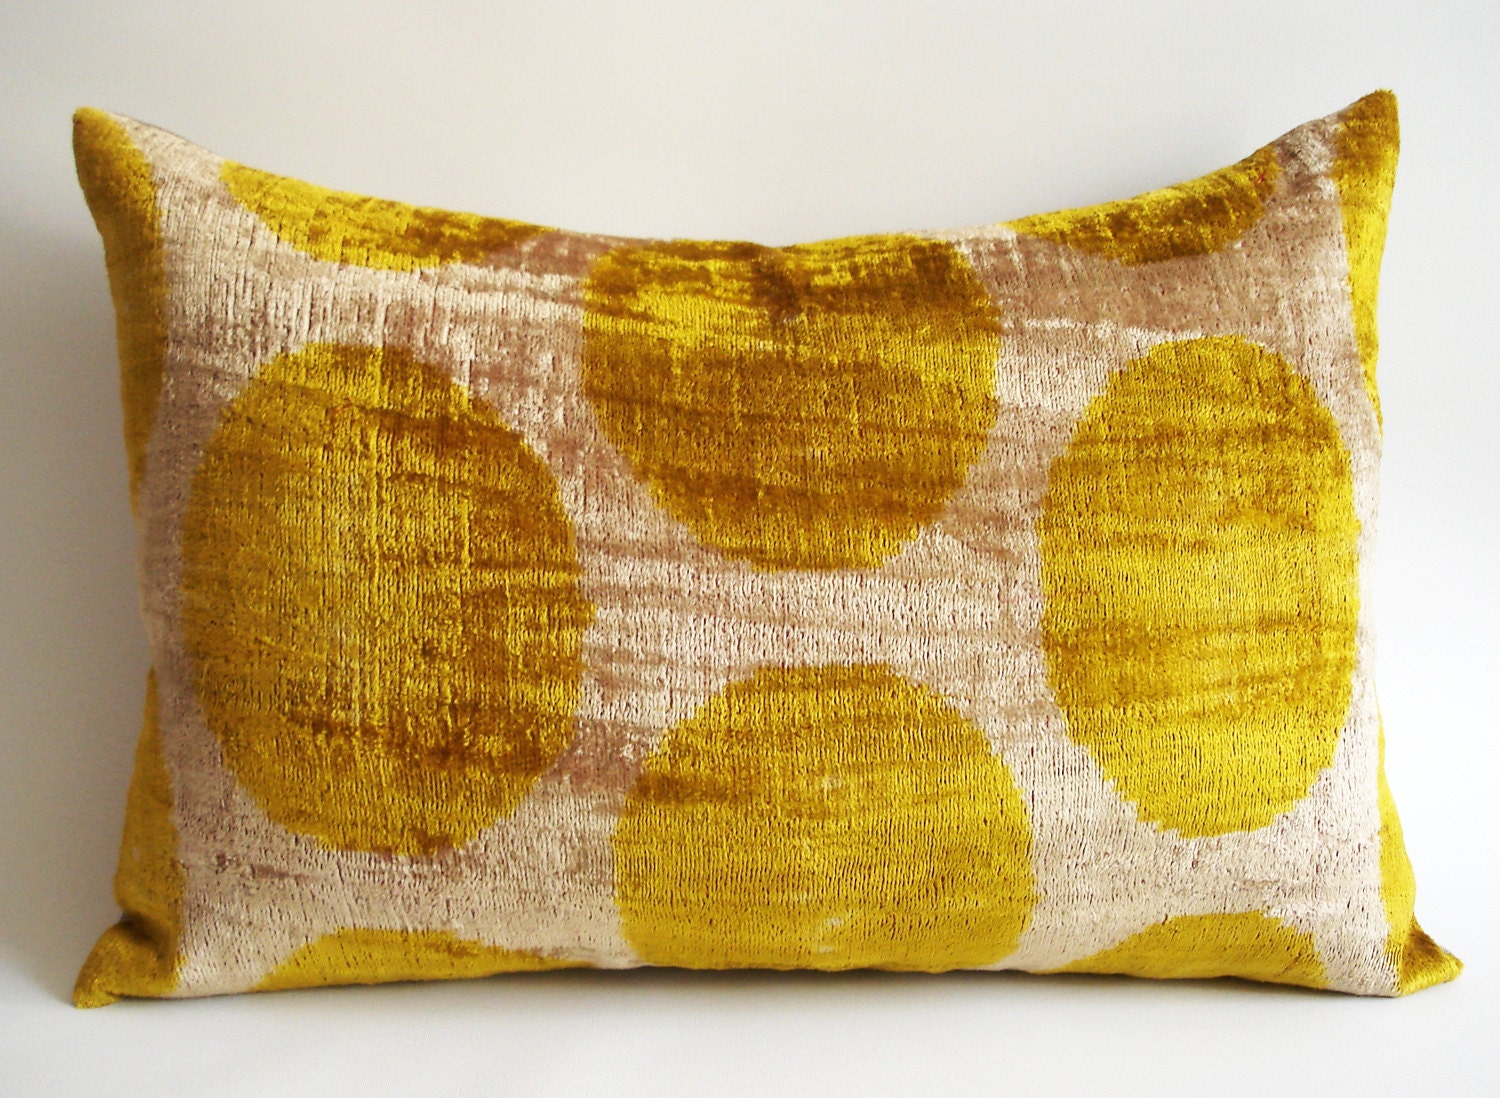 Sukan / SALE - Soft Hand Woven - Silk Velvet Ikat Pillow Cover - 15x22 inch - Beige Yellow Gold Color